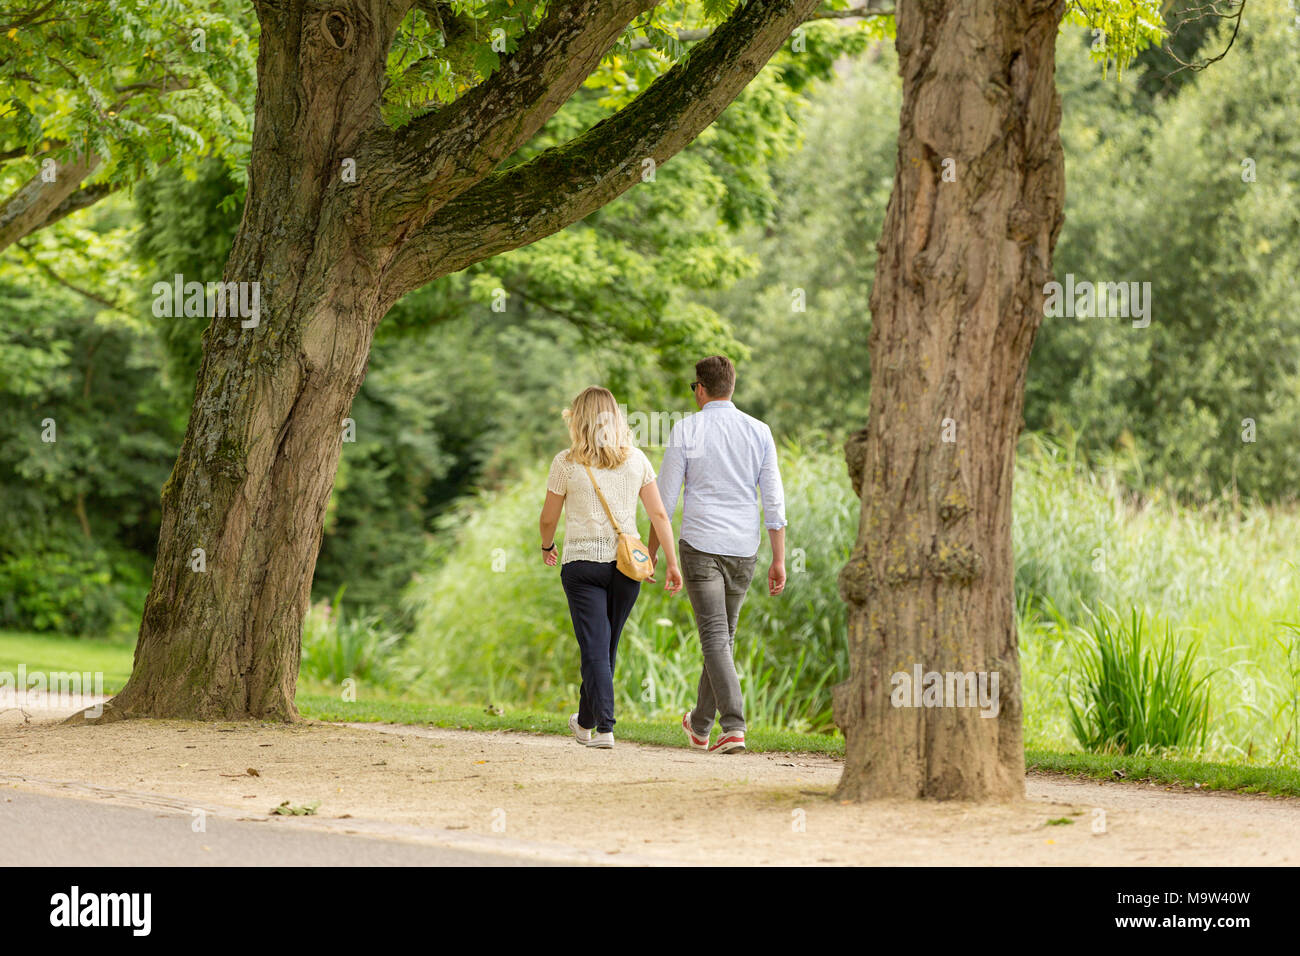 A man and woman walking through the Amsterdam Vondelpark in the Netherlands. Stock Photo